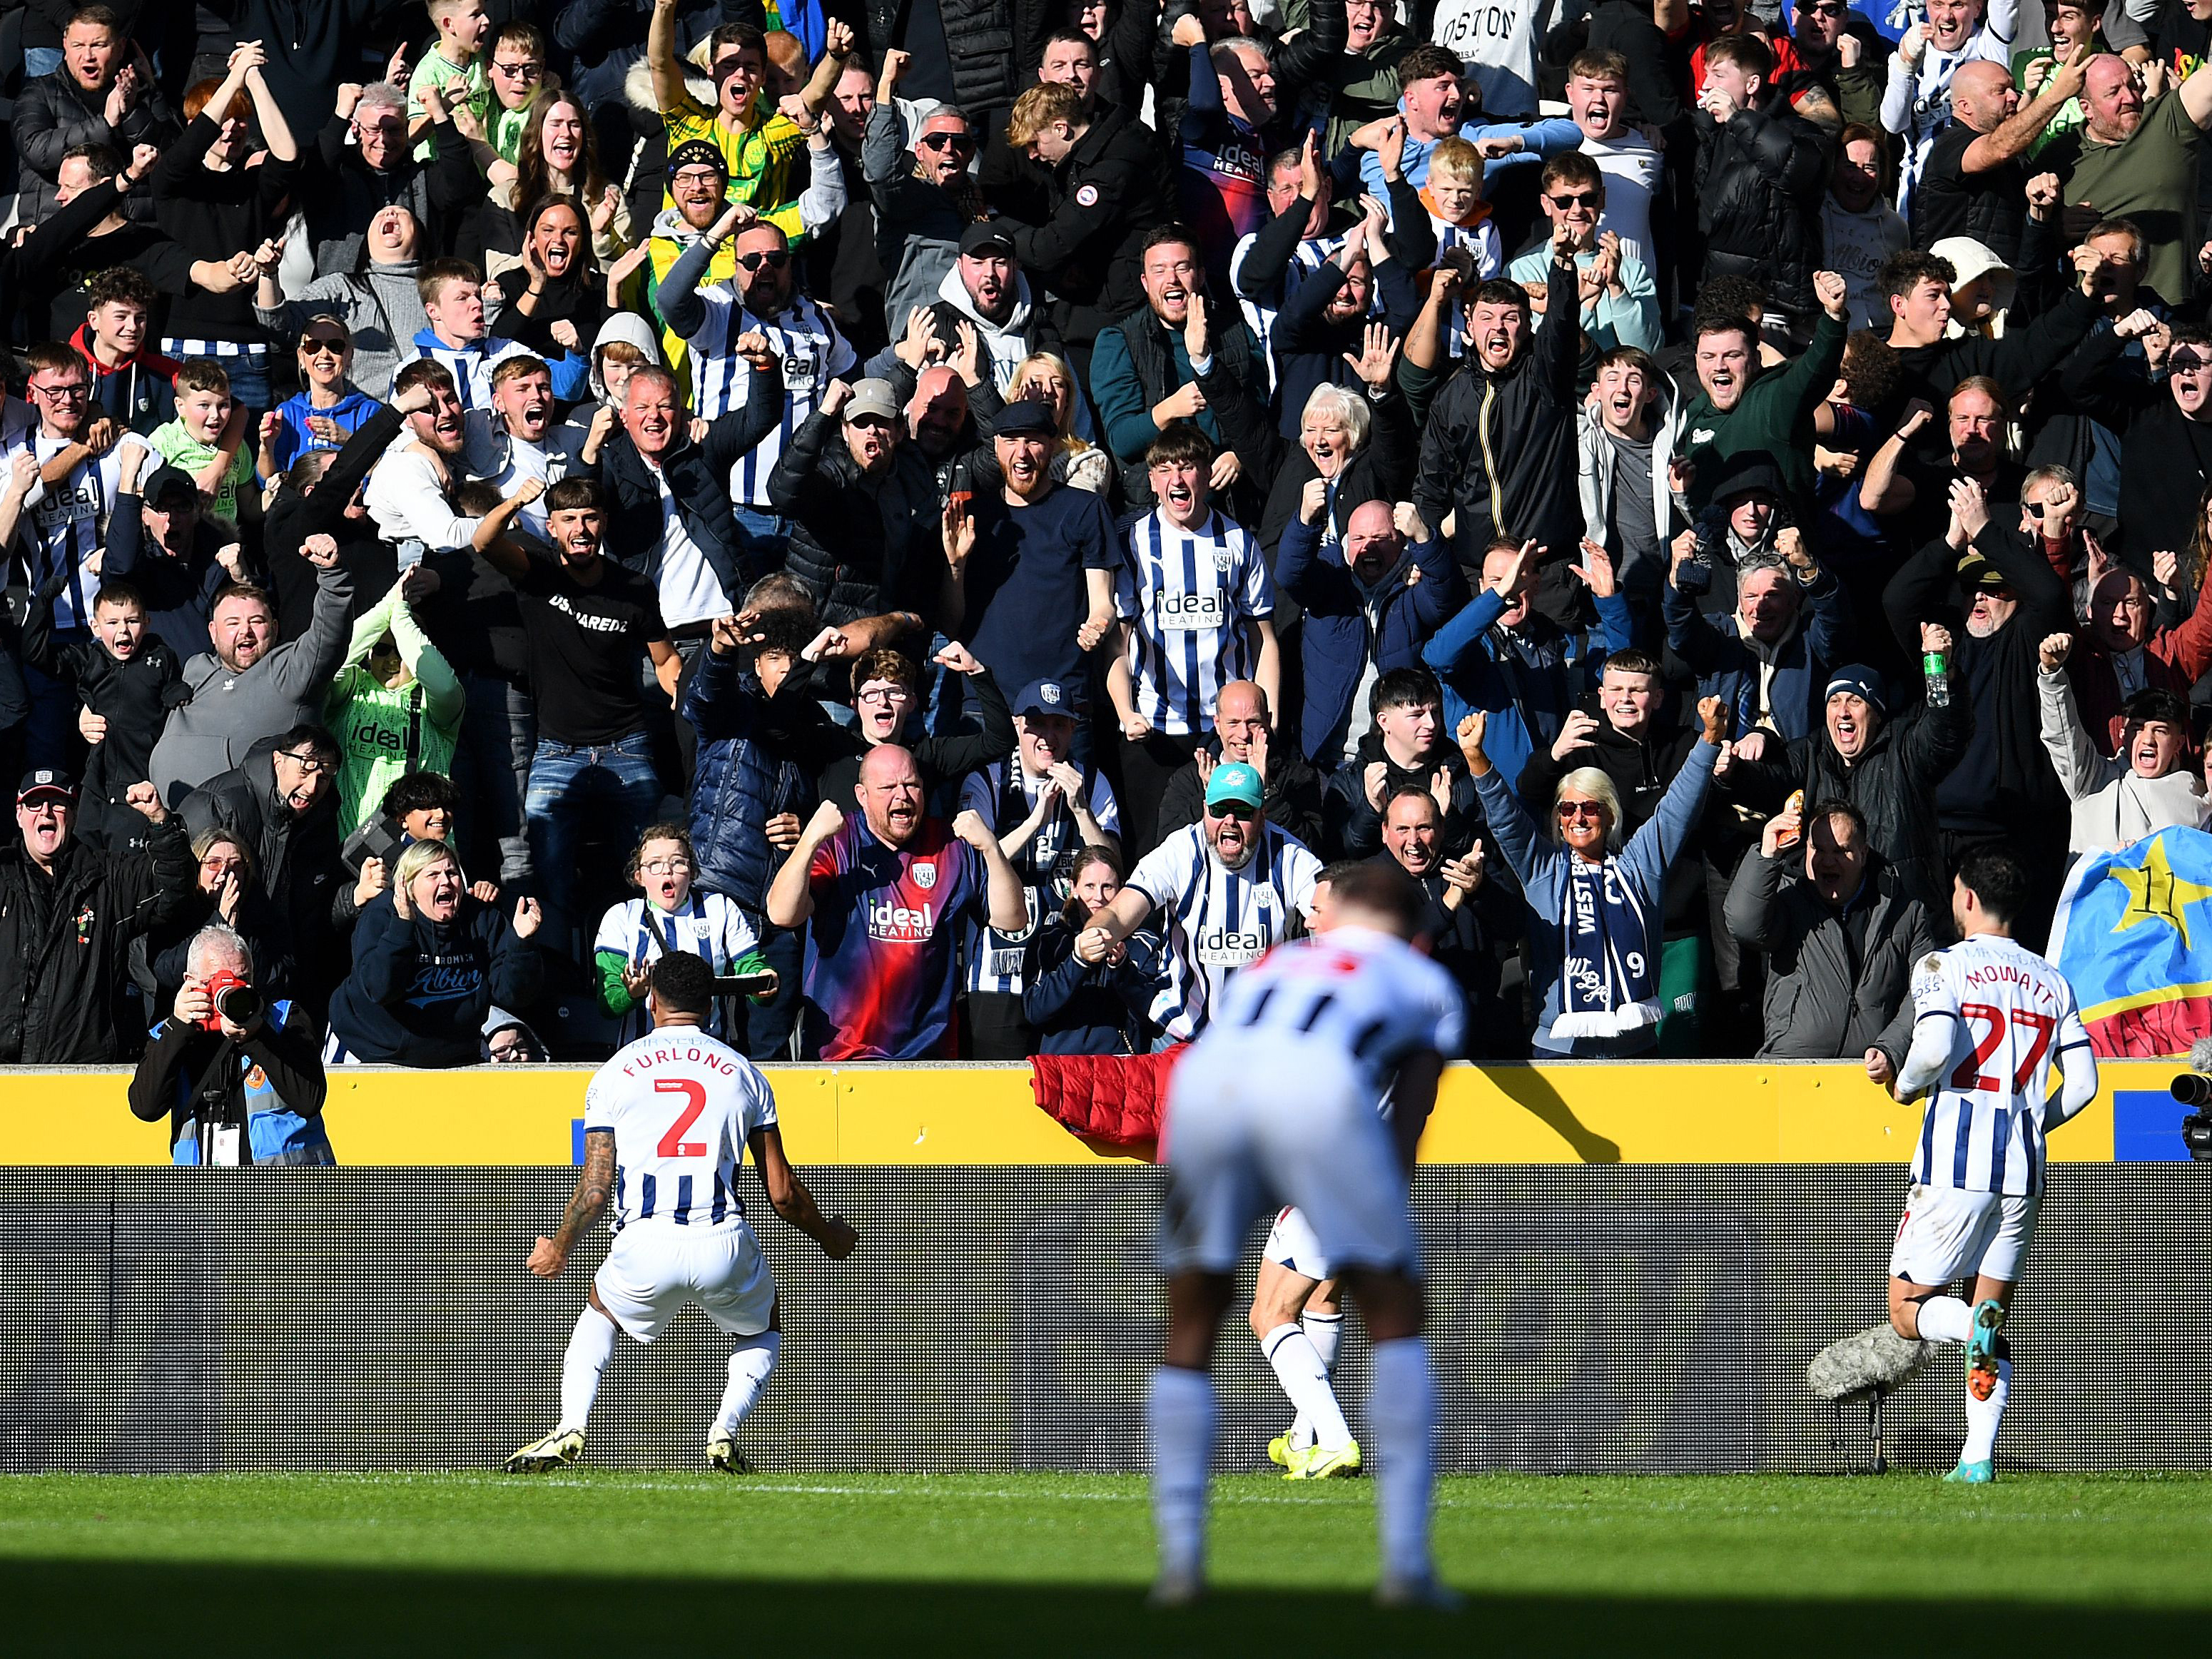 An image of Darnell Furlong celebrating with Albion's supporters